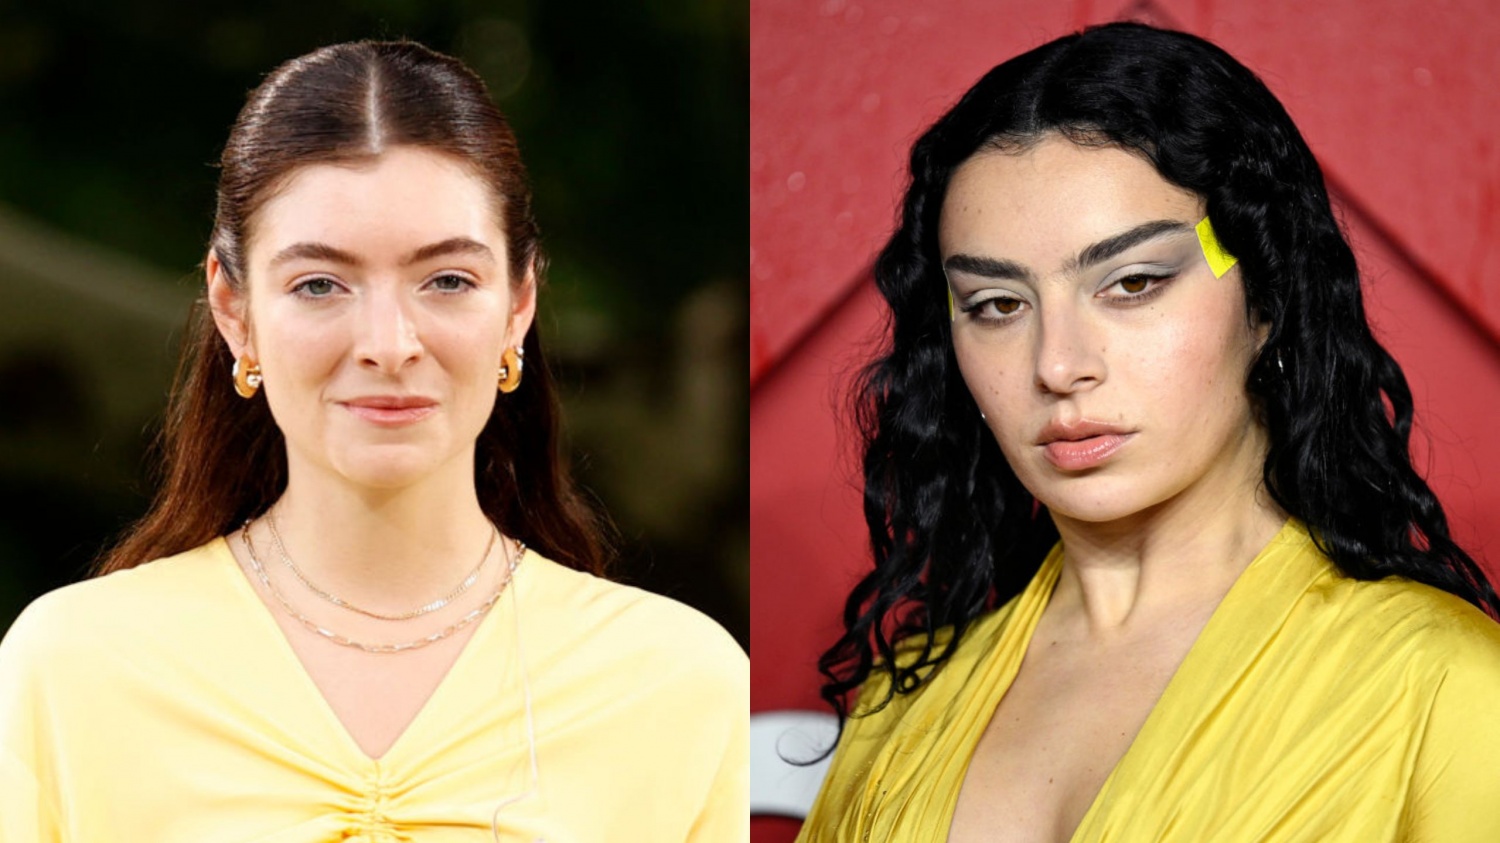 Charli XCX teams up with Lorde for ‘Girl, So Confusing’ remix after fan theories surrounding beef allegations